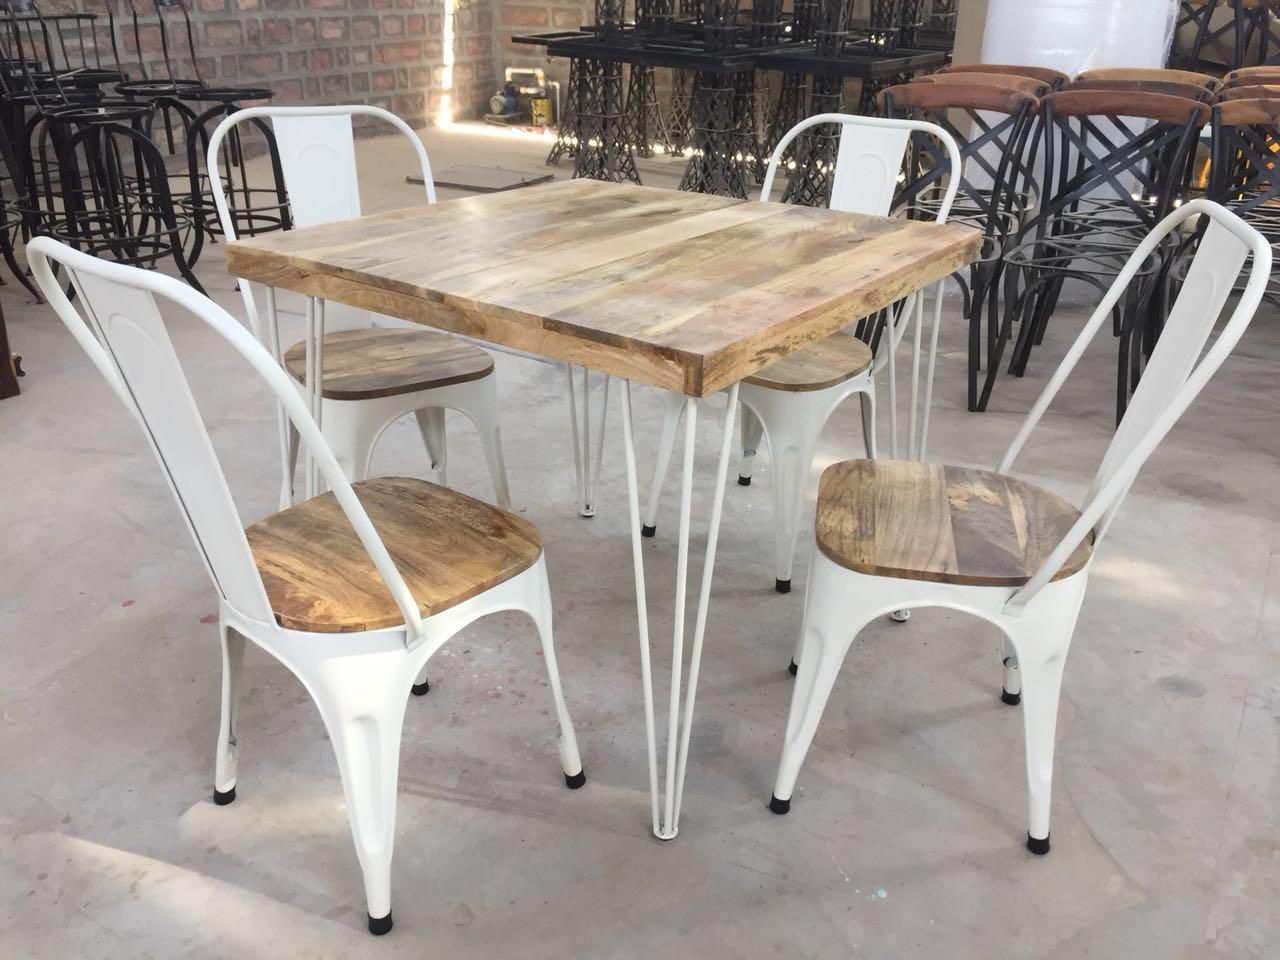 Restaurant Furniture - Table and Chairs  from AMBER ART EXPORT